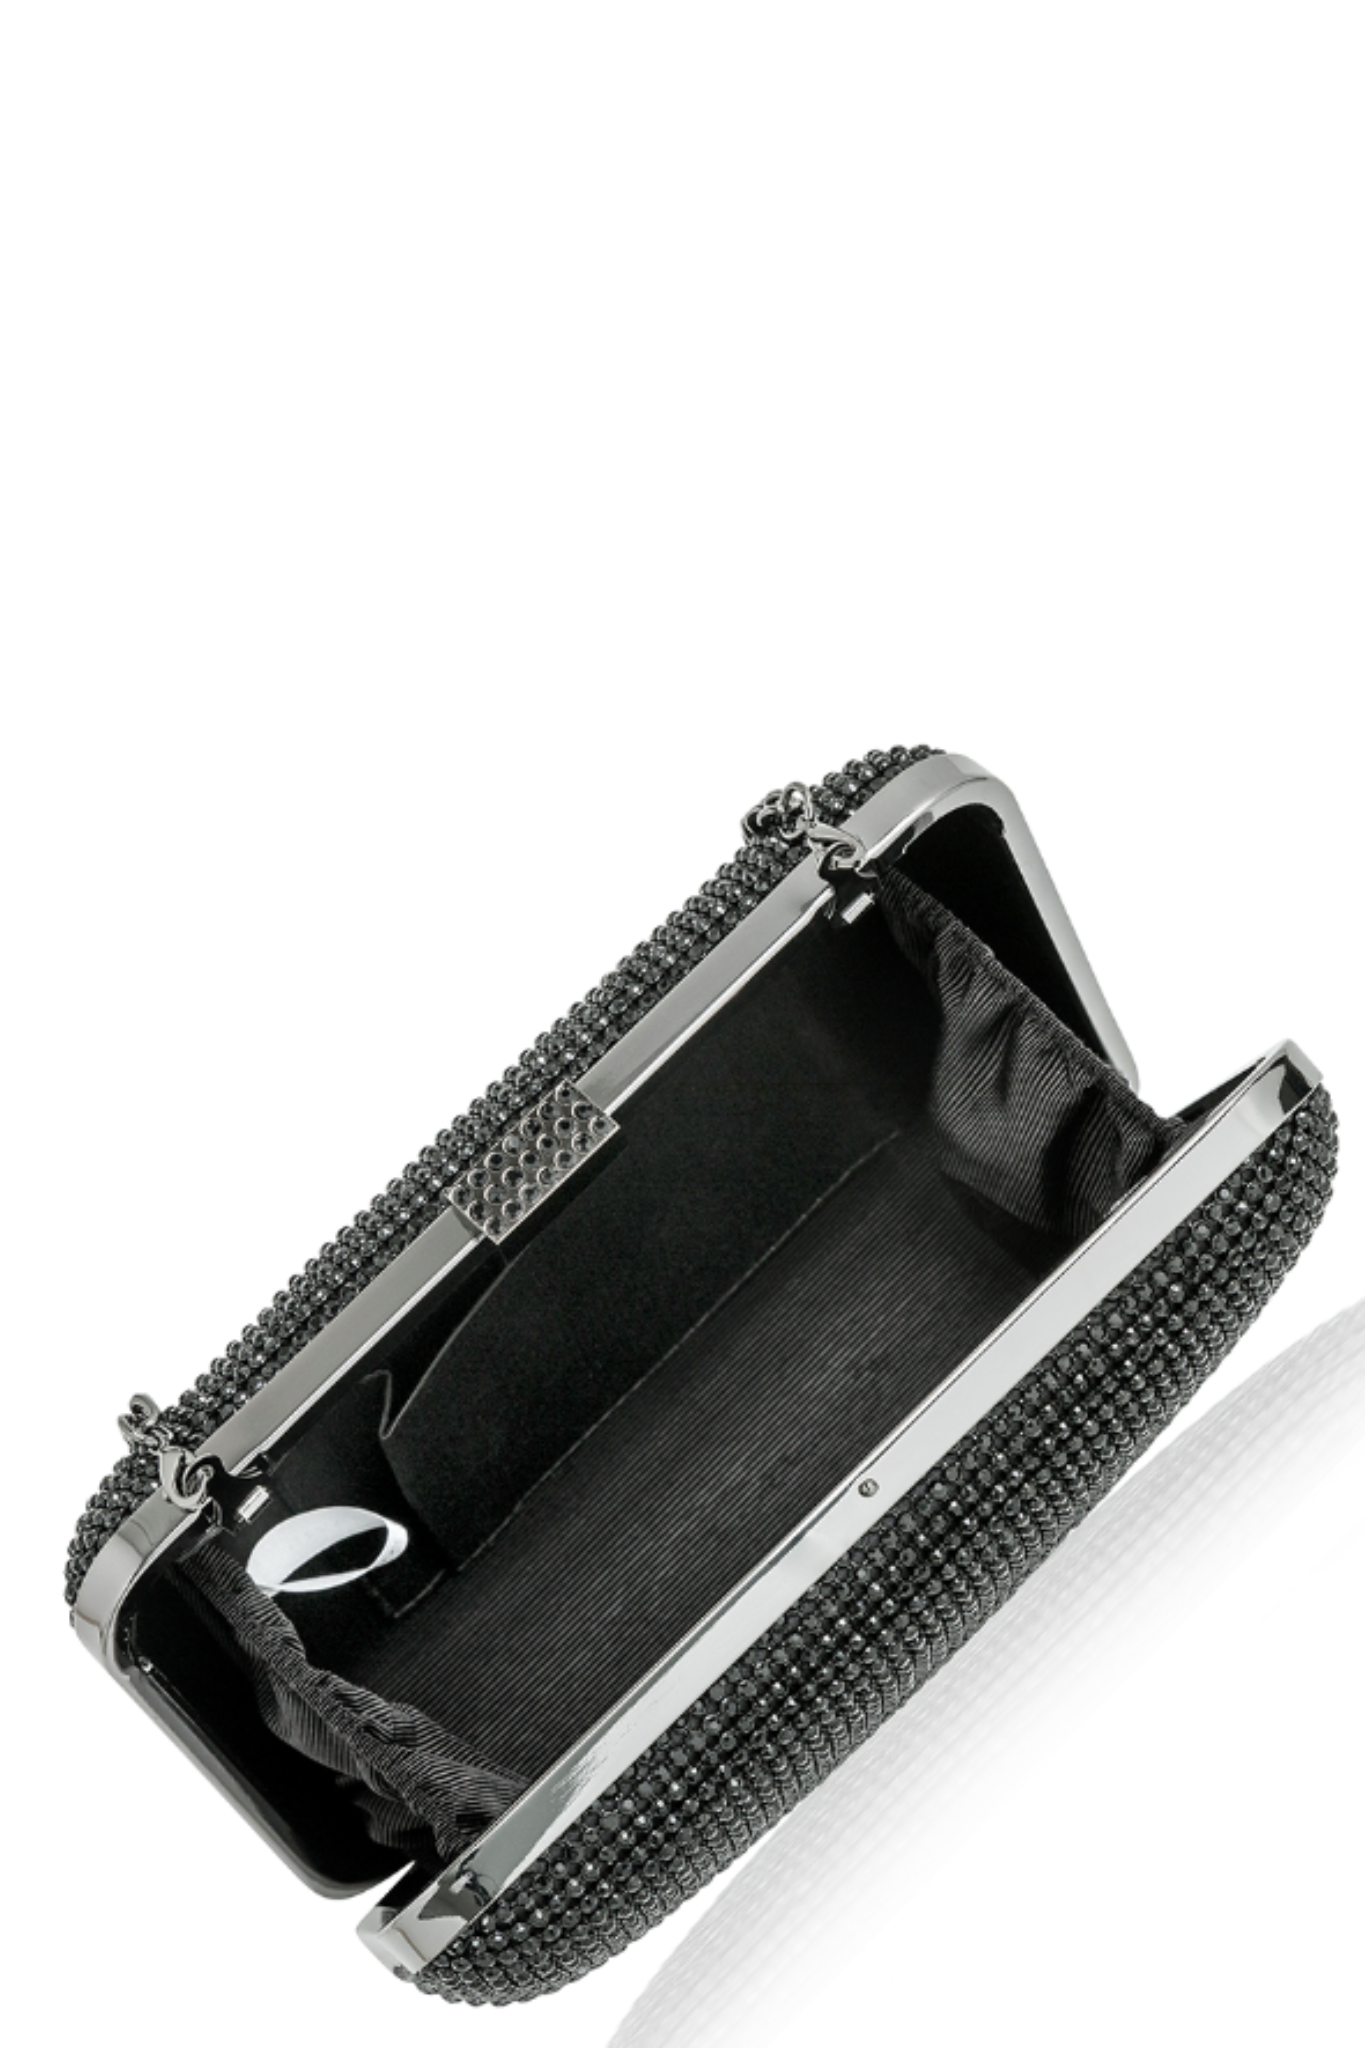 Yves Crystal Clutch in Black by Whiting and Davis - RENTAL